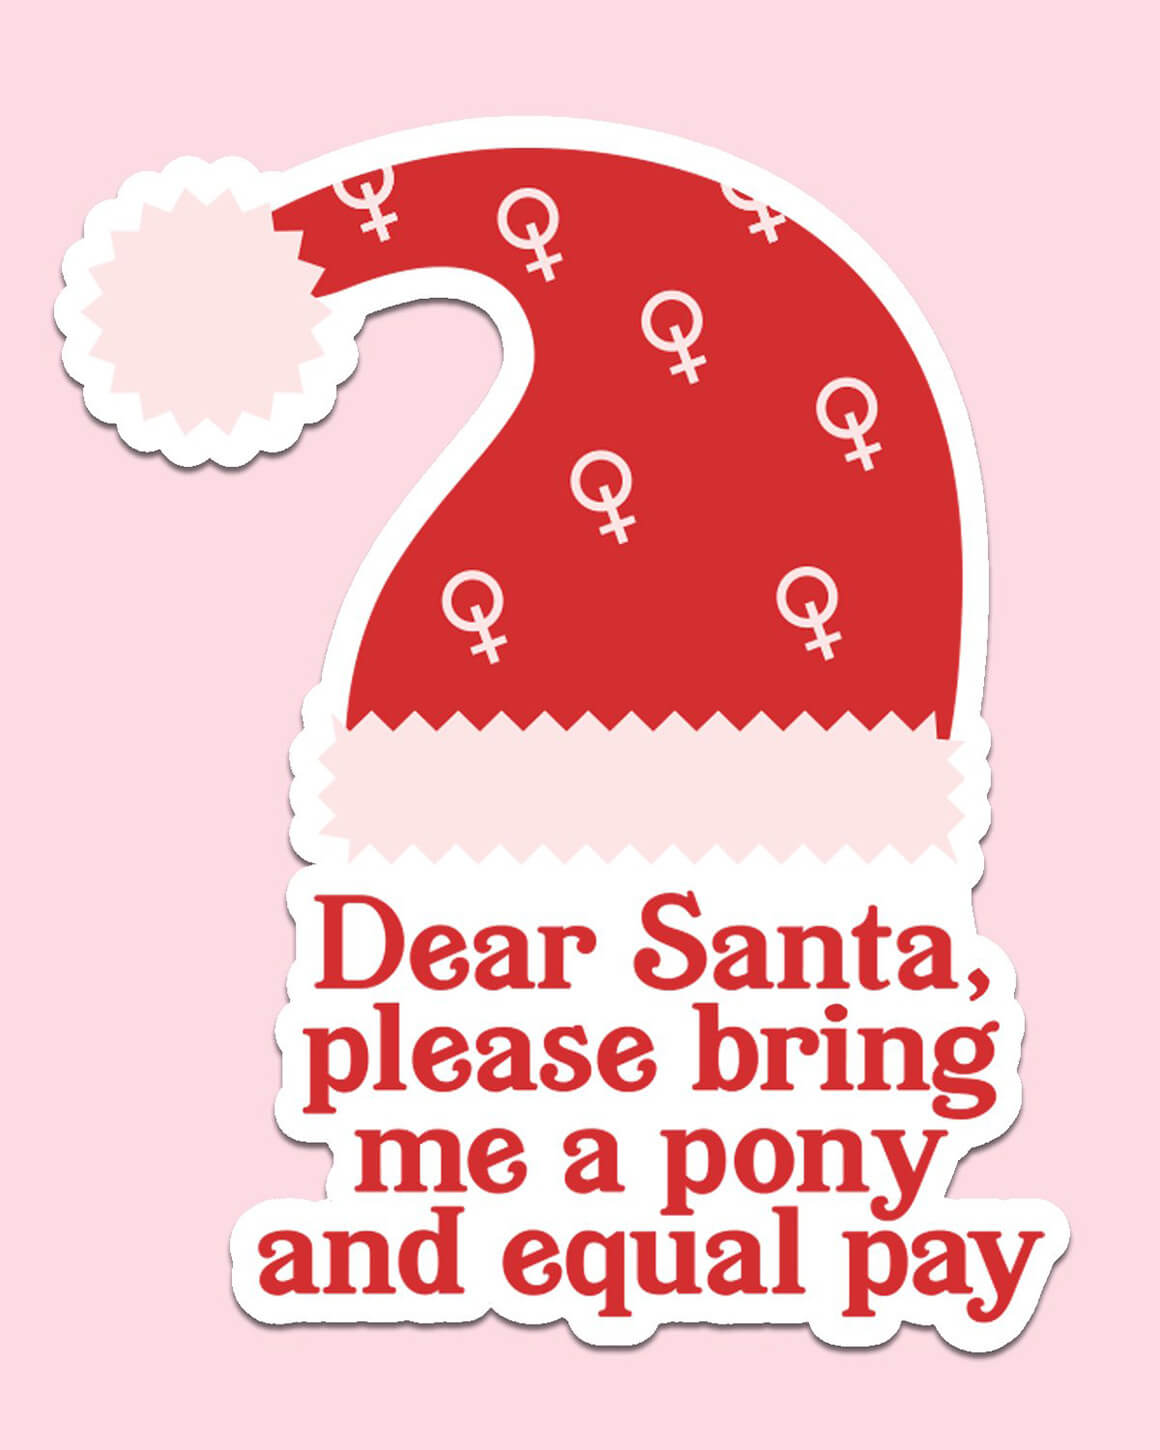 Dear Santa, please bring me a pony and equal pay feminist decal